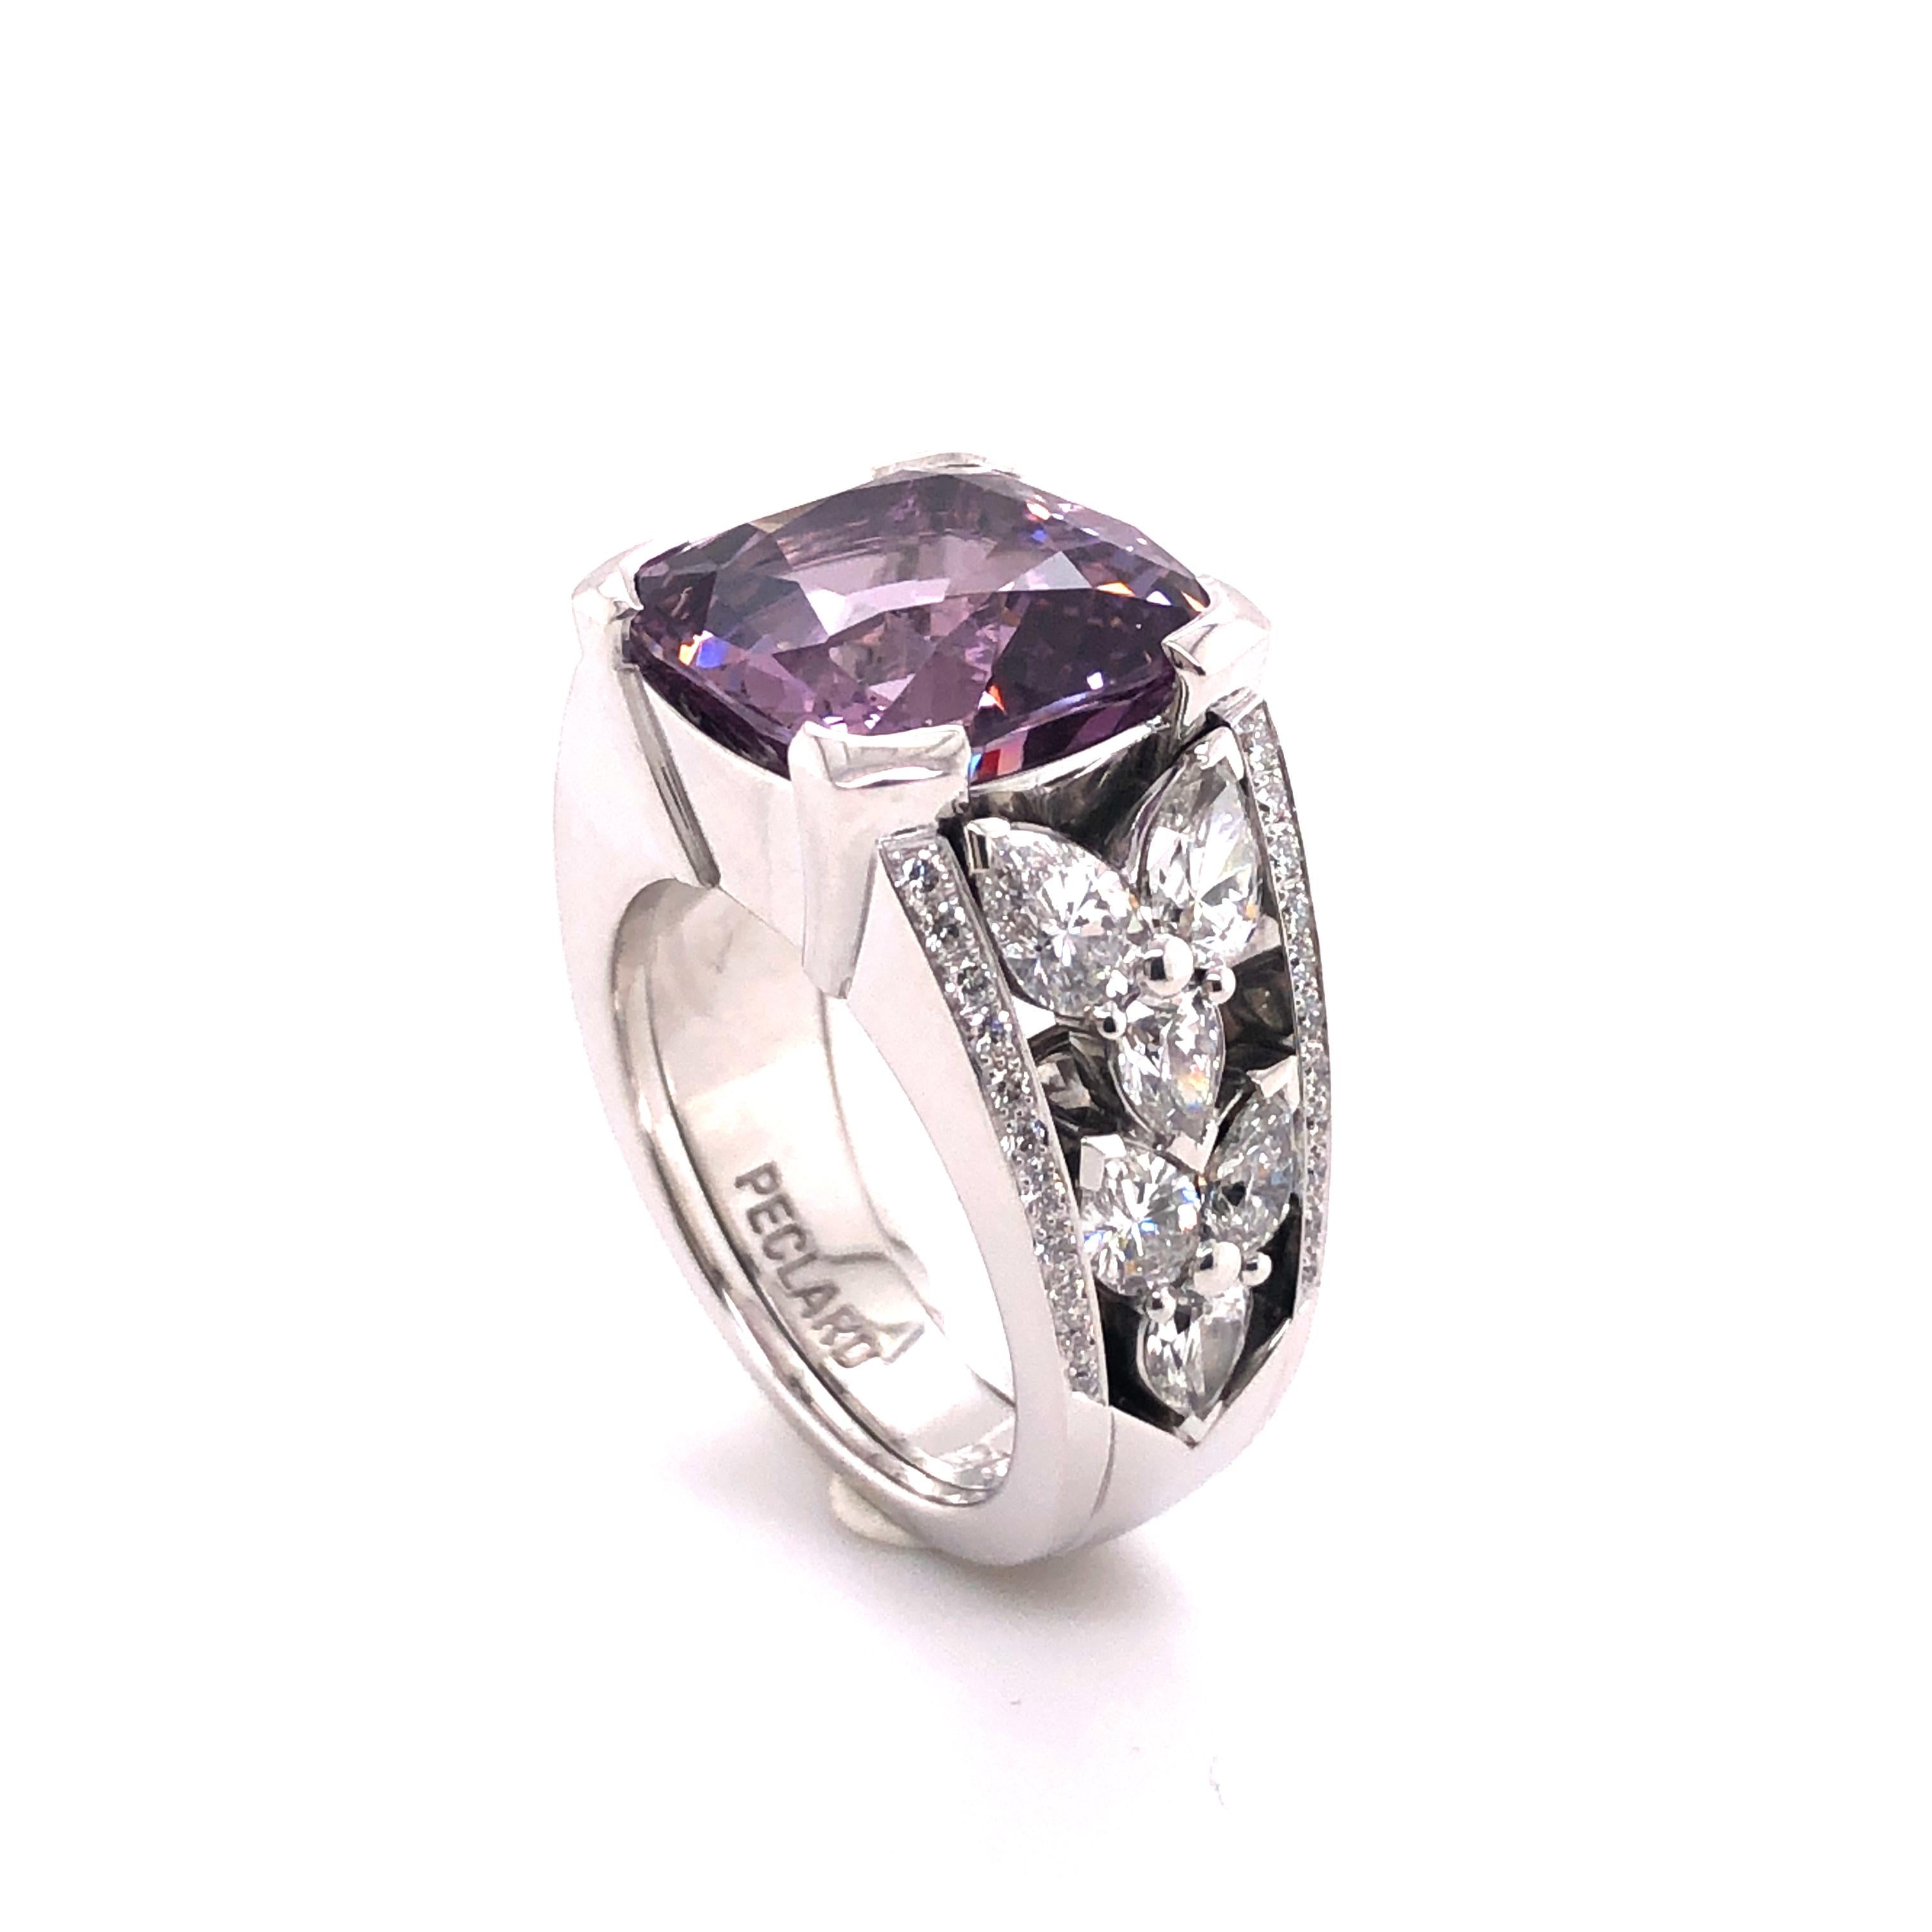 Certified 8.90 Ct Violet Burmese Spinel and Diamond Ring in 18 Karat White Gold For Sale 2